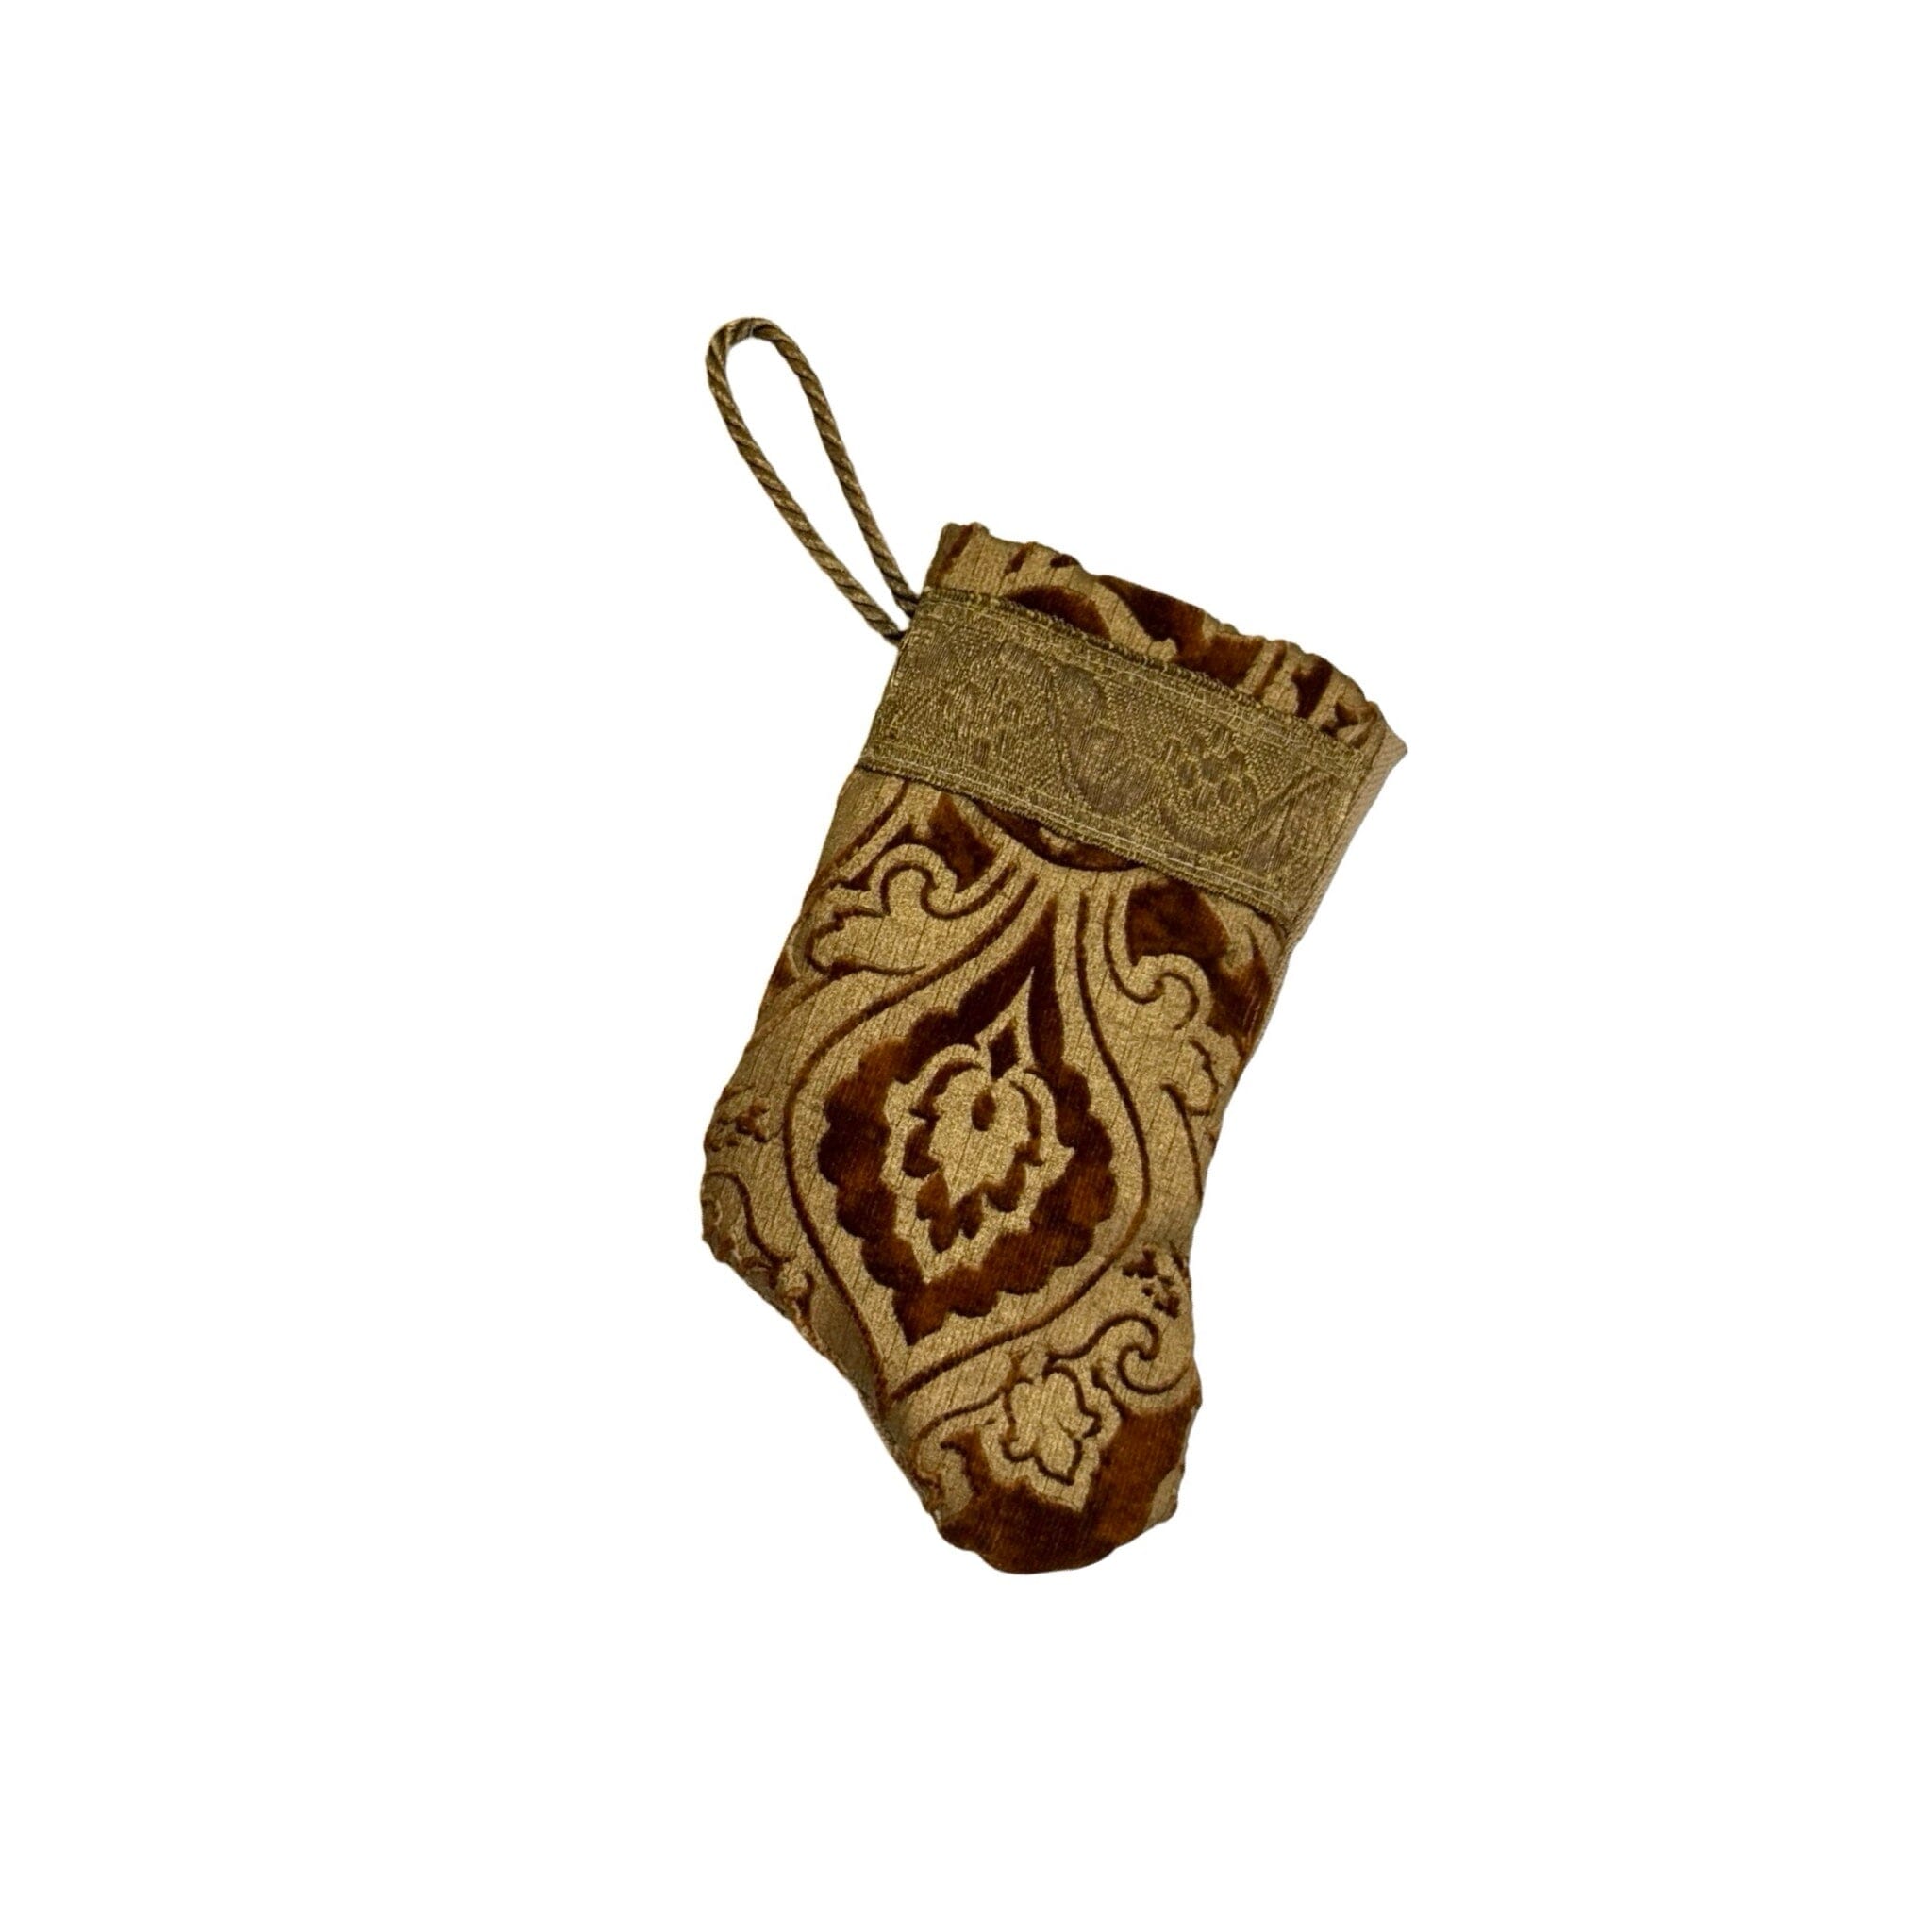 Handmade Mini Stocking Made From Vintage Fabric and Trims- Brown and Gold Ornament B. Viz Design B 